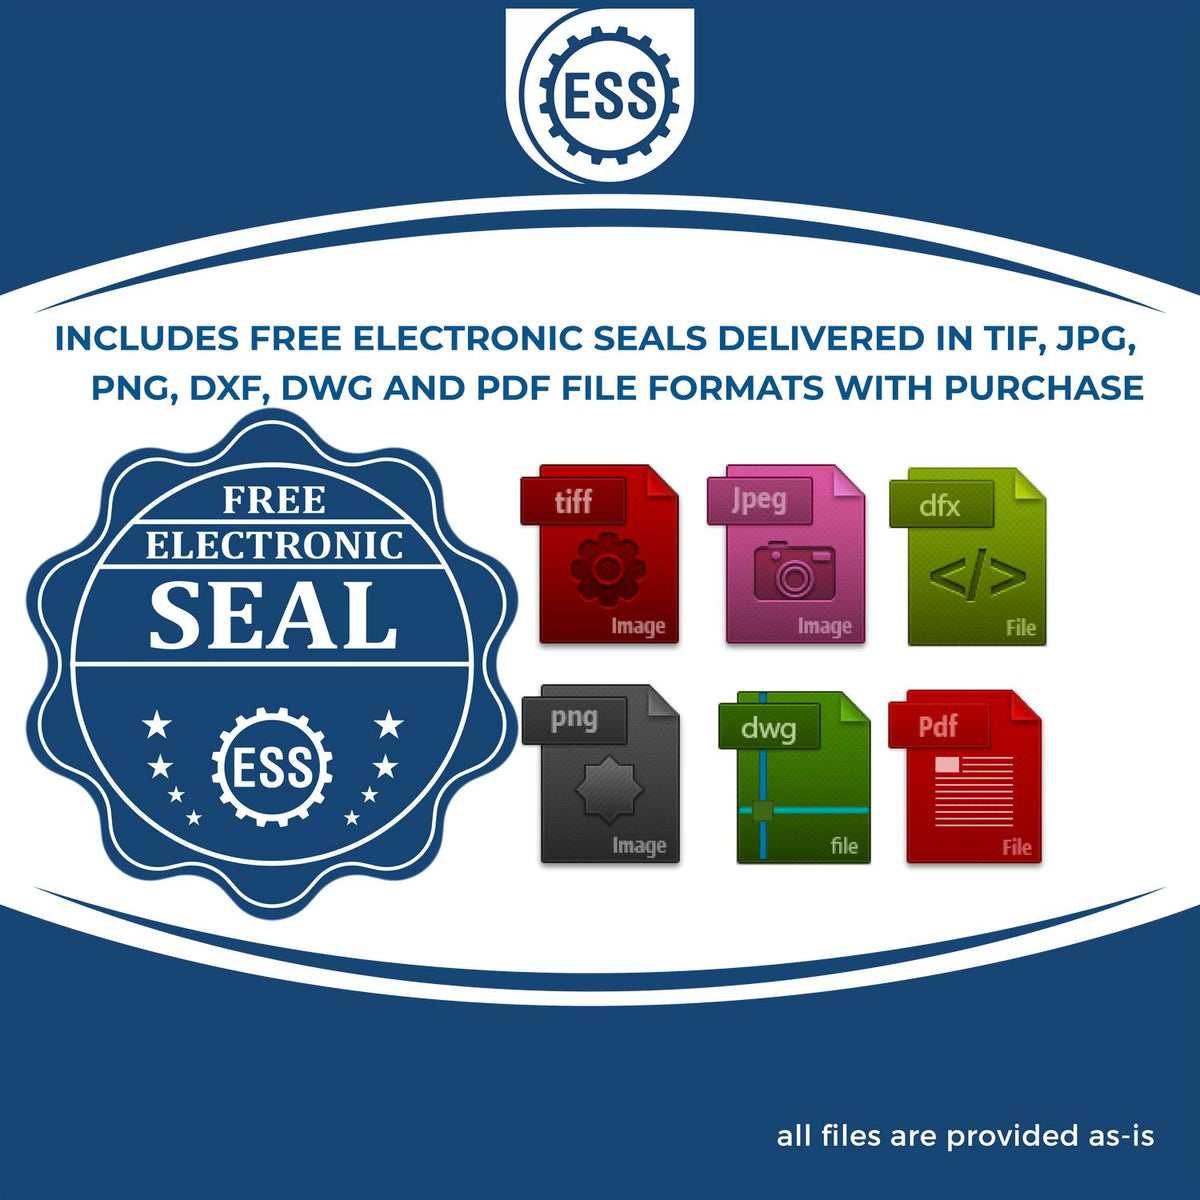 An infographic for the free electronic seal for the Handheld Louisiana Professional Geologist Embosser illustrating the different file type icons such as DXF, DWG, TIF, JPG and PNG.